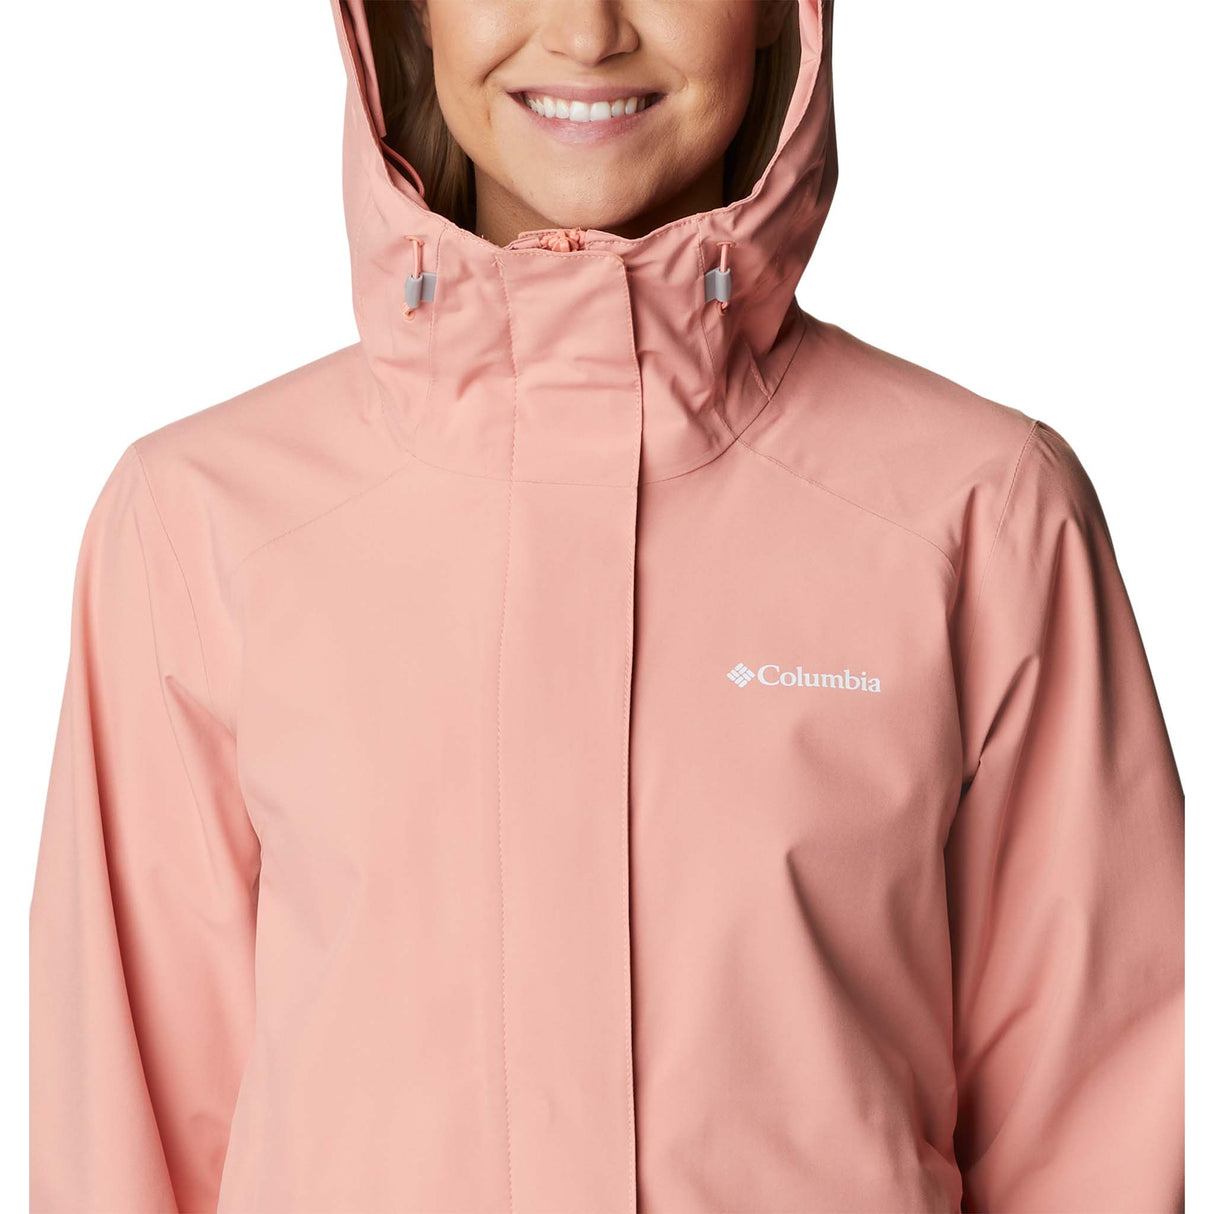 Columbia Earth Explorer Shell manteau coquille coral reef femme col